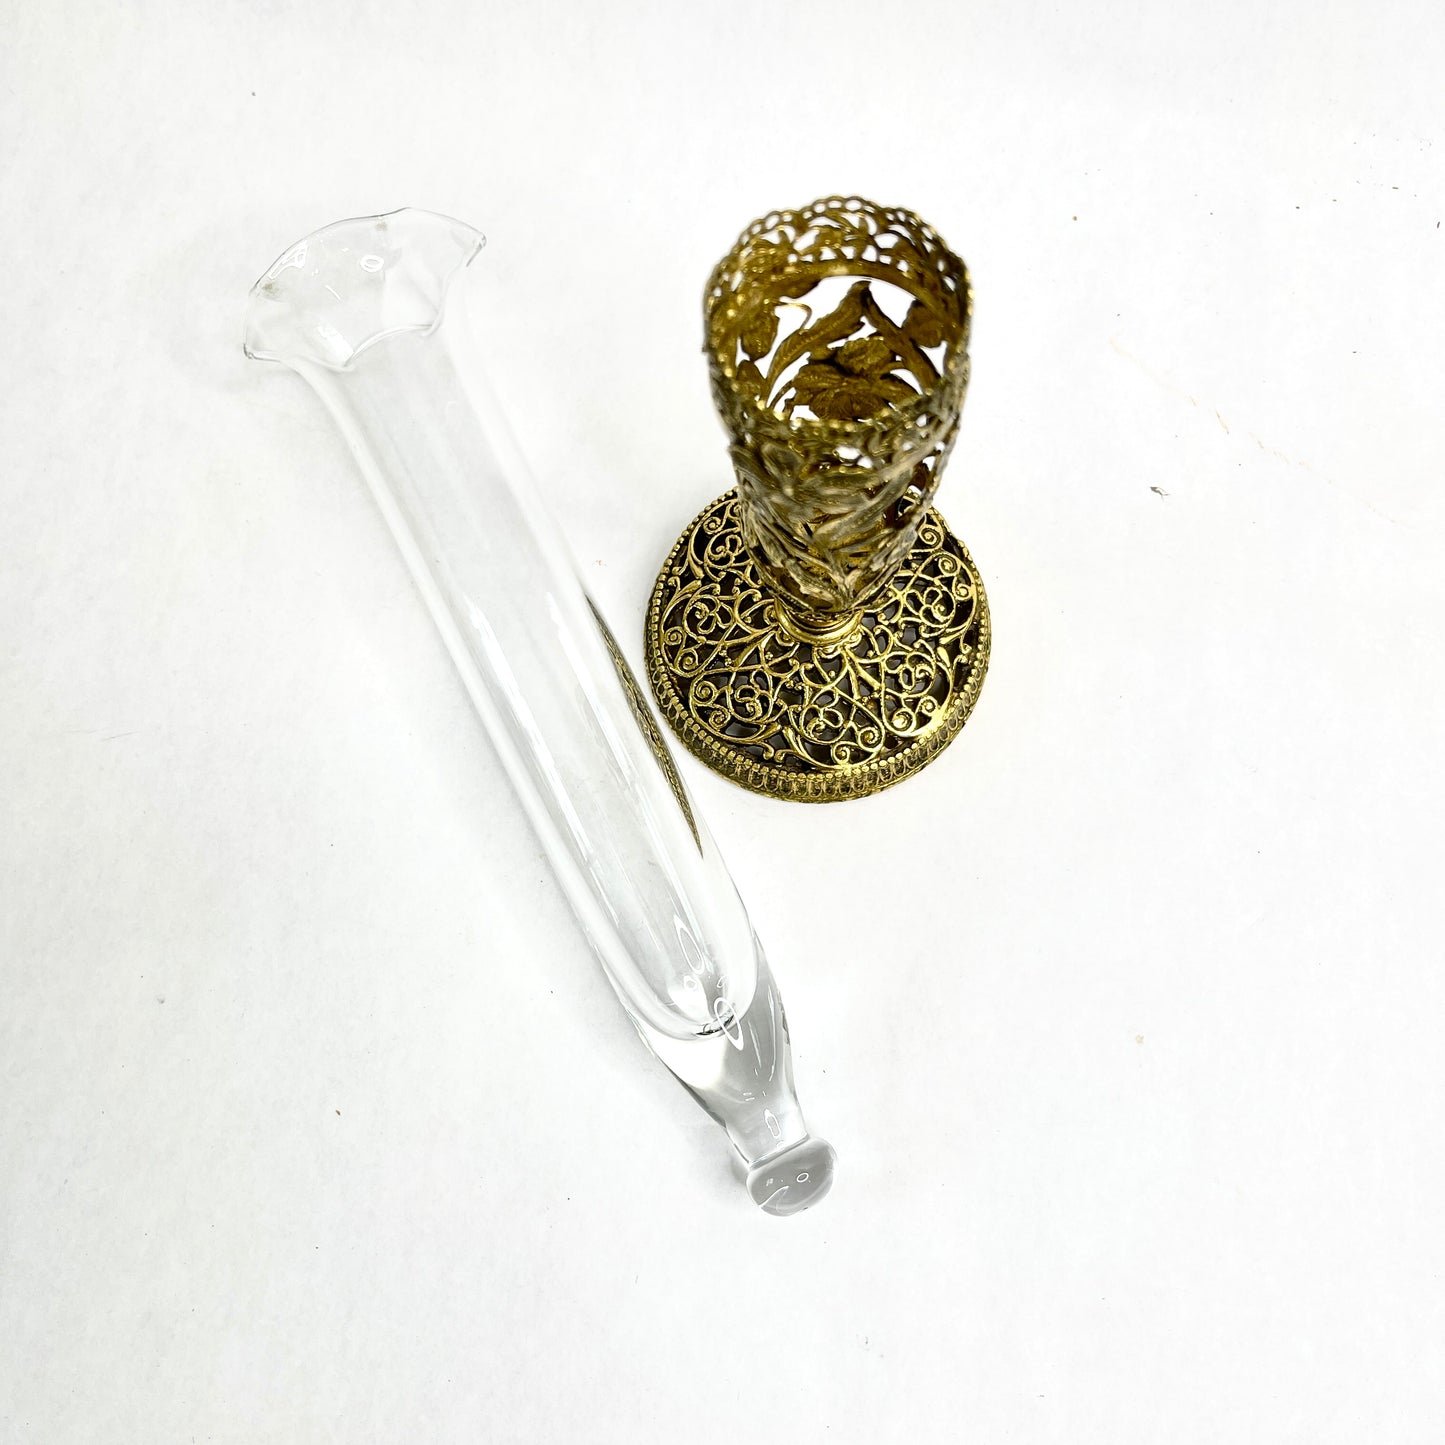 Vintage Bud Vase with Gold Ormulu Filigree and Glass Flute with Scalloped Edge Glass Insert